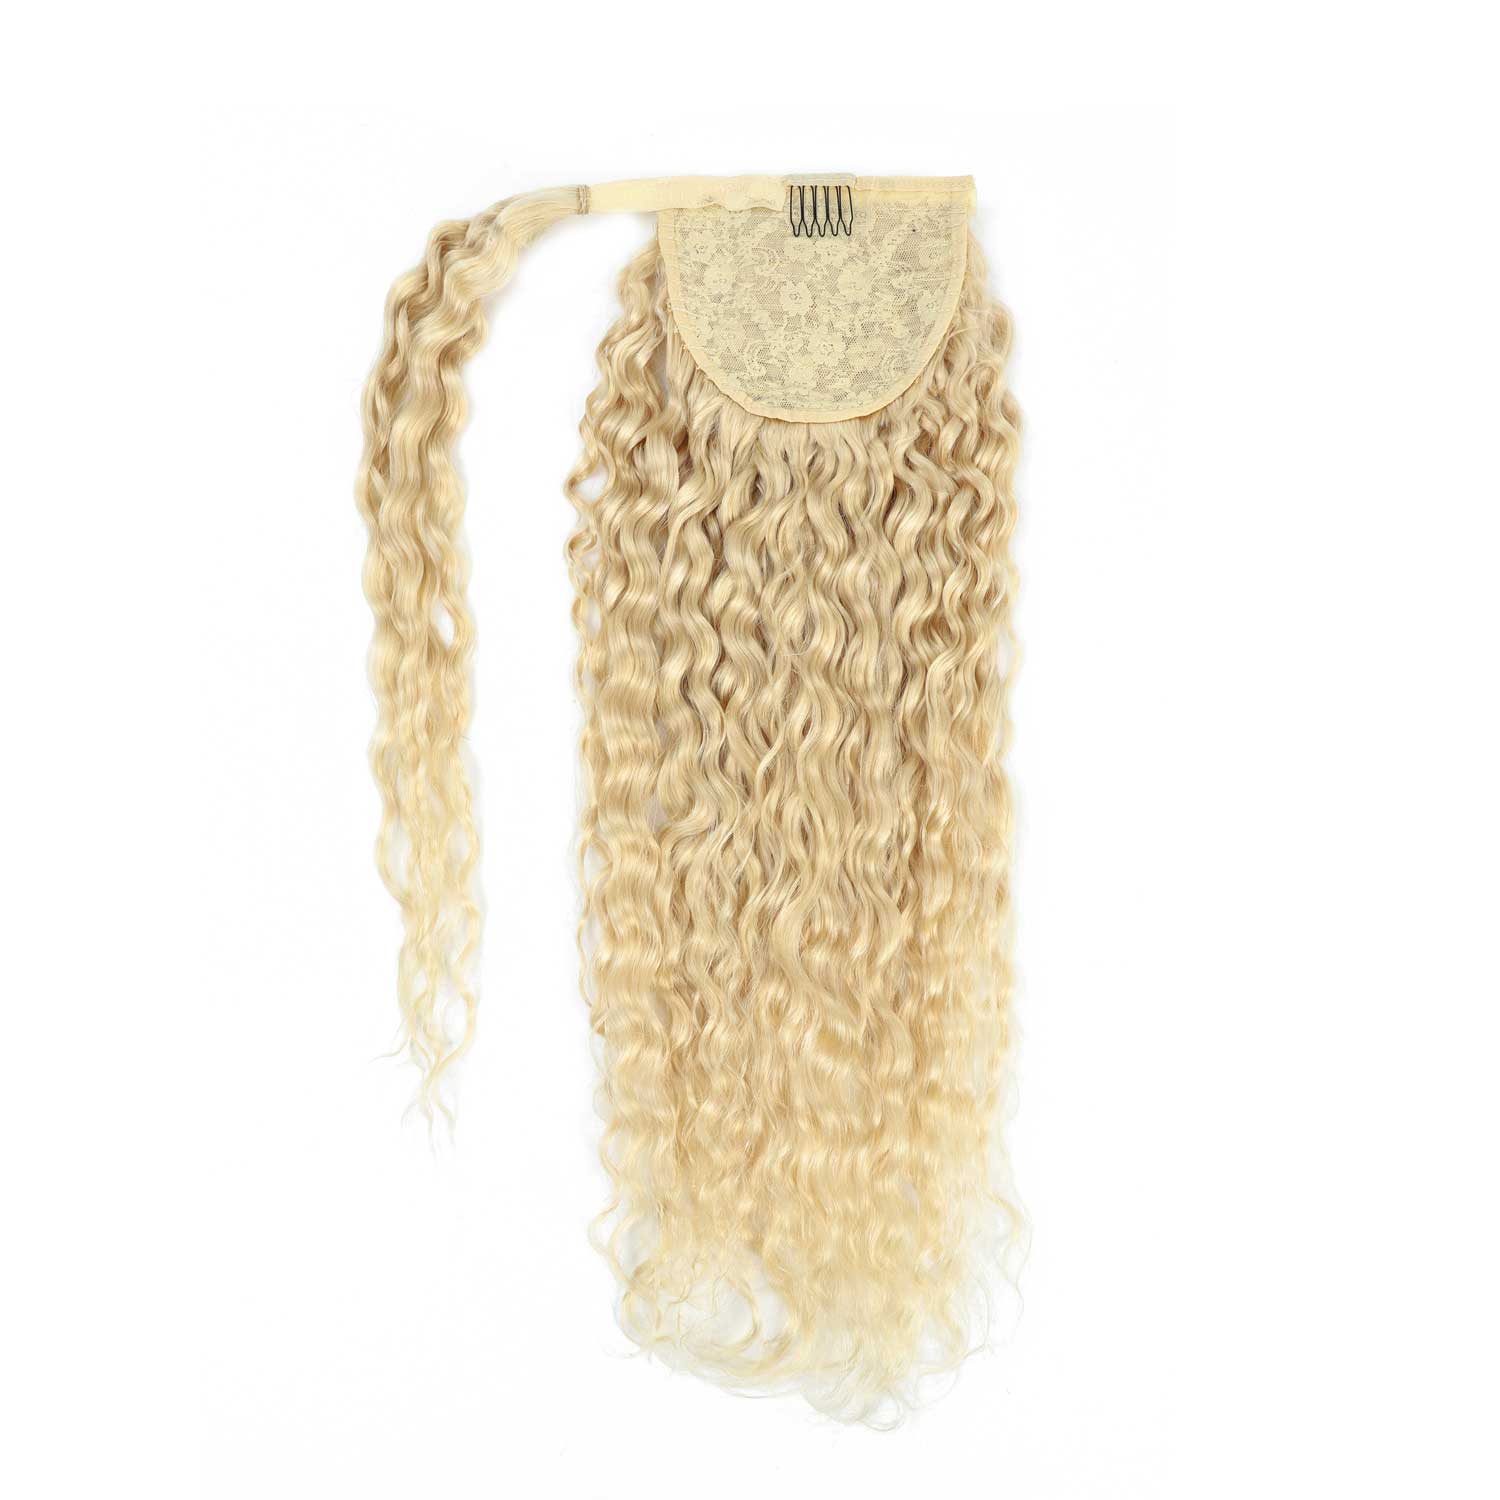 Curly Ponytail Human Hair Extensions #1001 Pearl Blonde